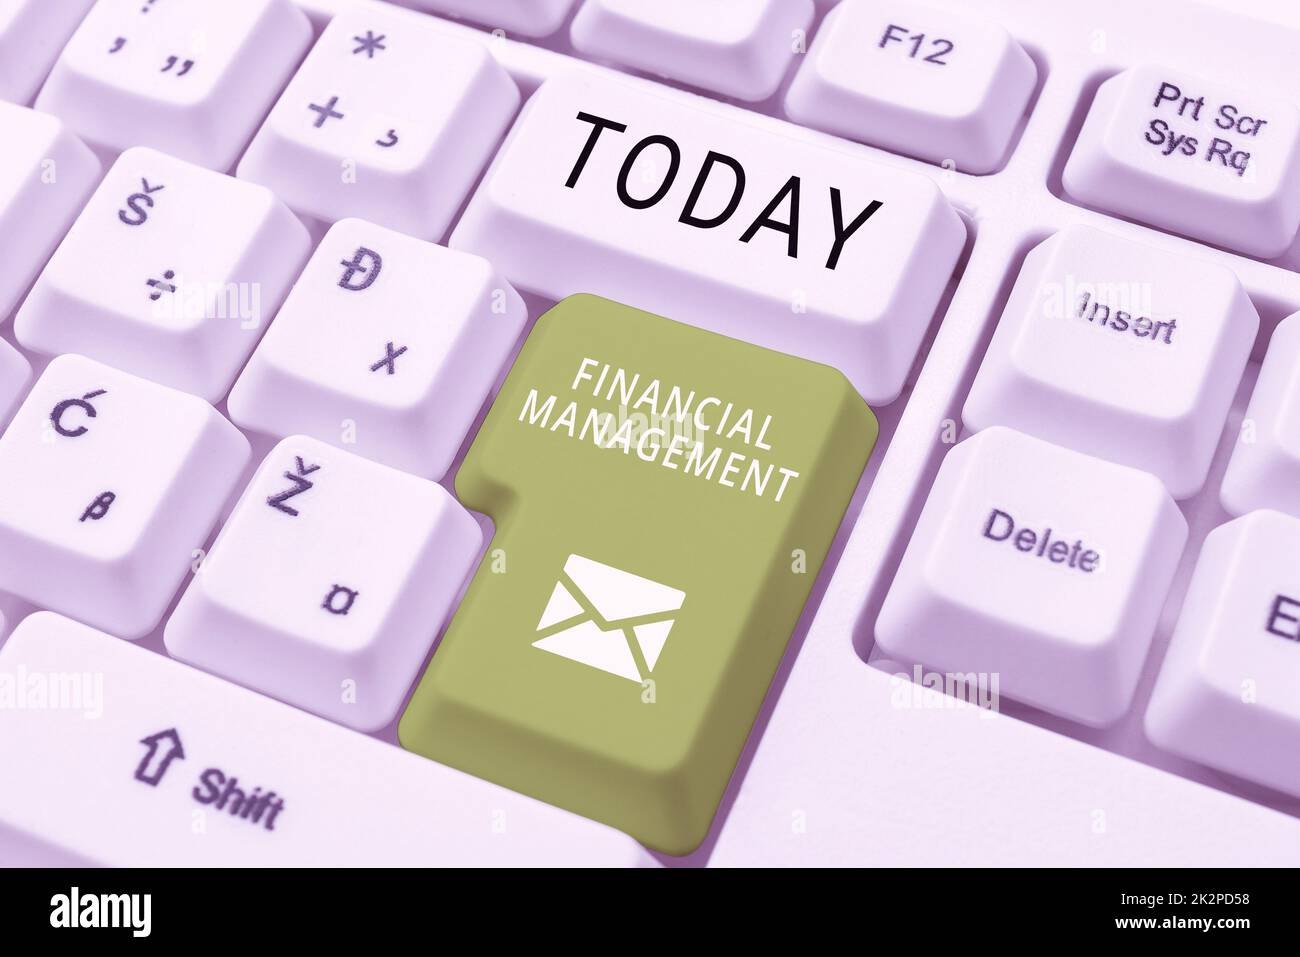 Inspiration showing sign Financial Management. Word Written on efficient and effective way to Manage Money and Funds Stock Photo